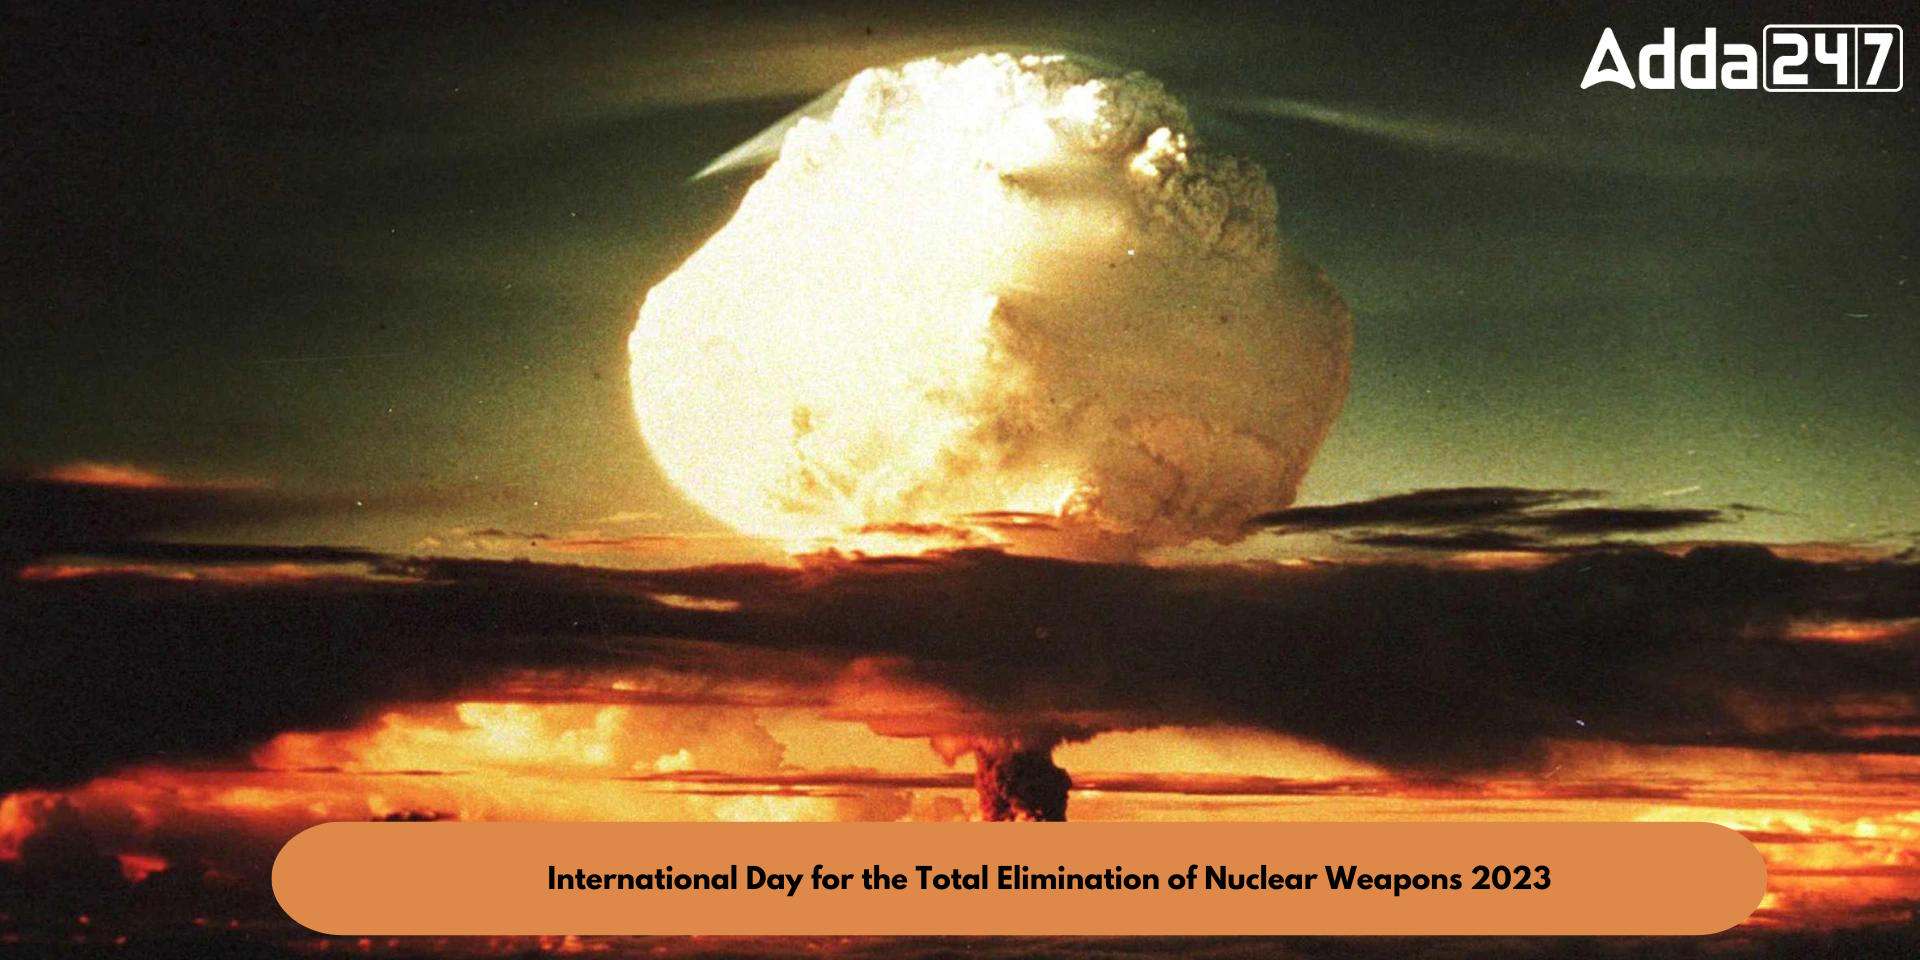 International Day for the Total Elimination of Nuclear Weapons 2023